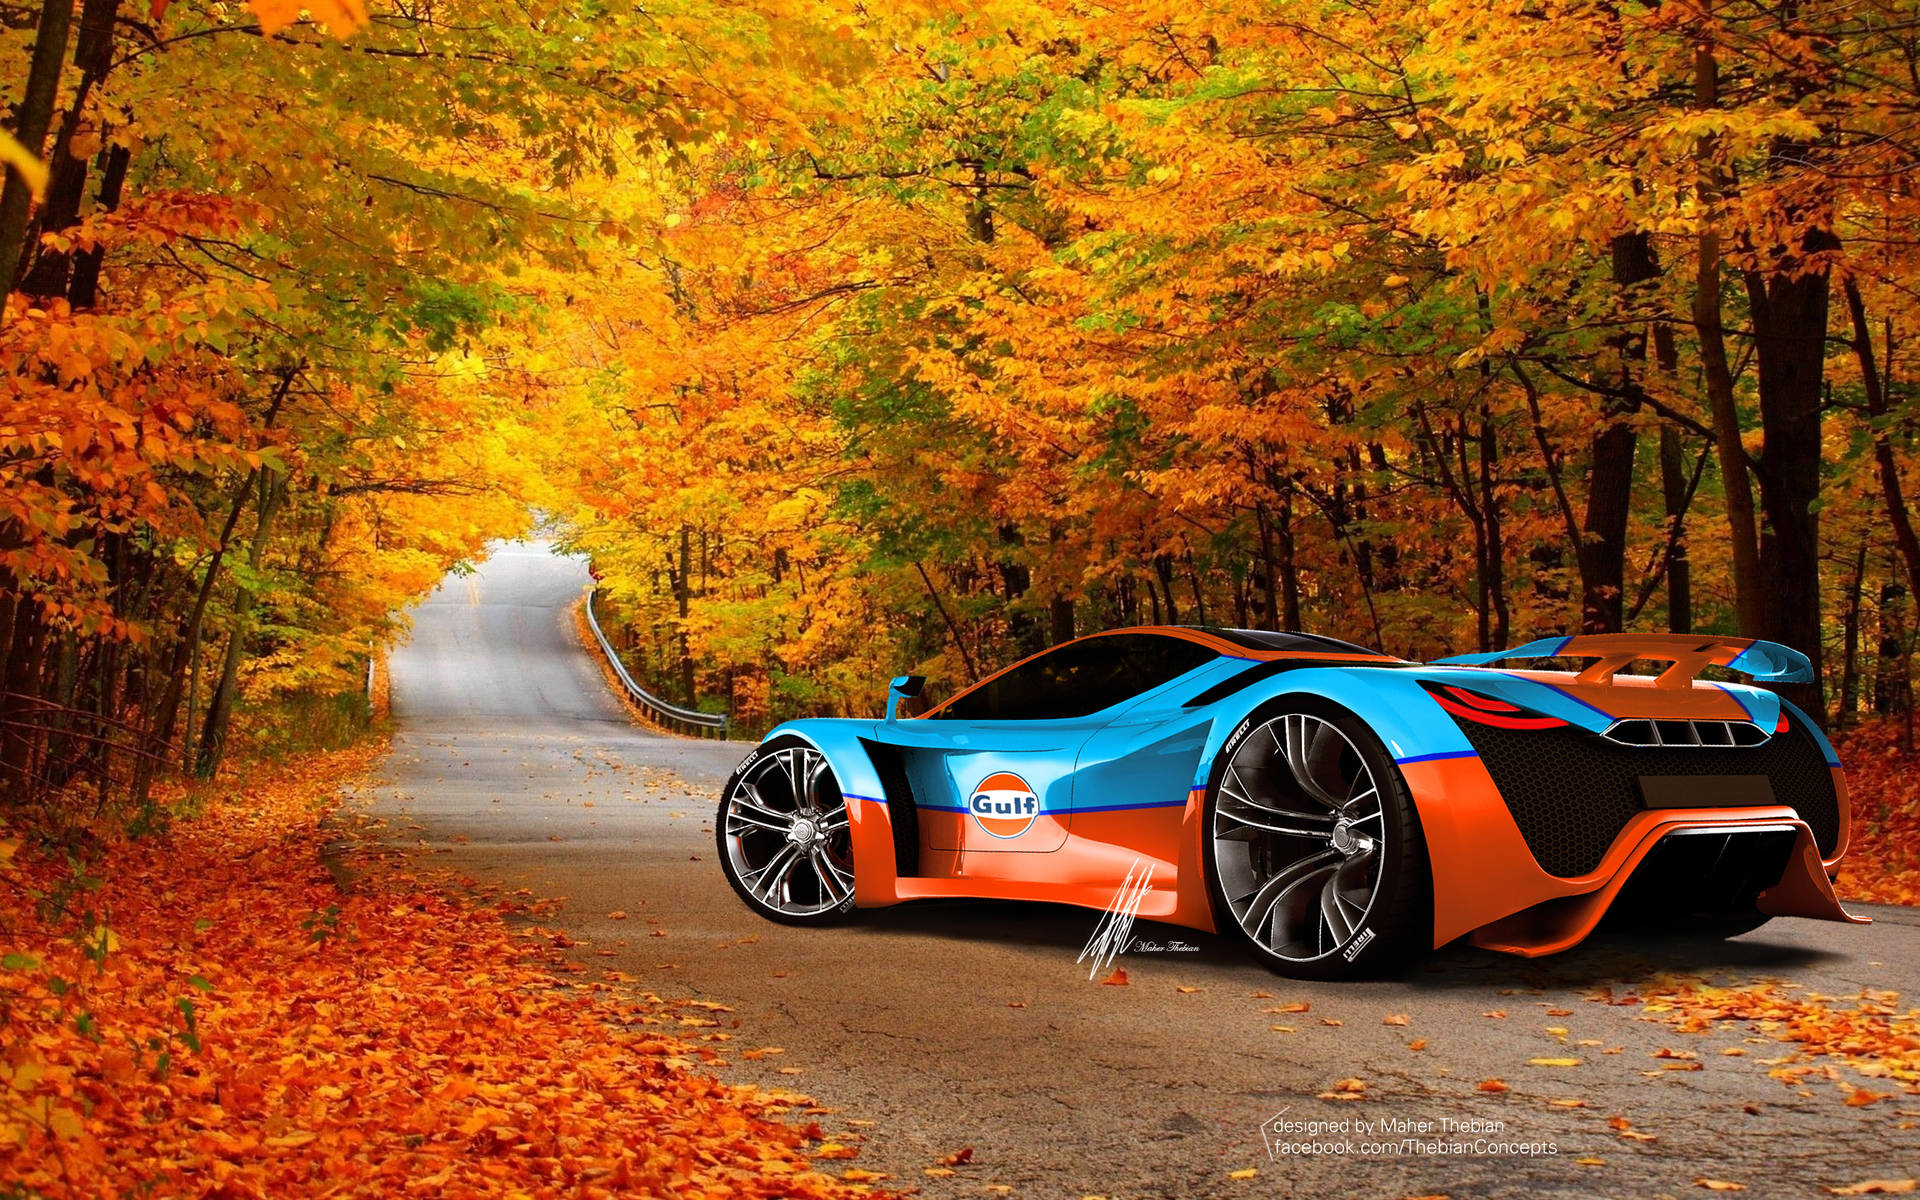 Pagani In Autumn From Iphone Background